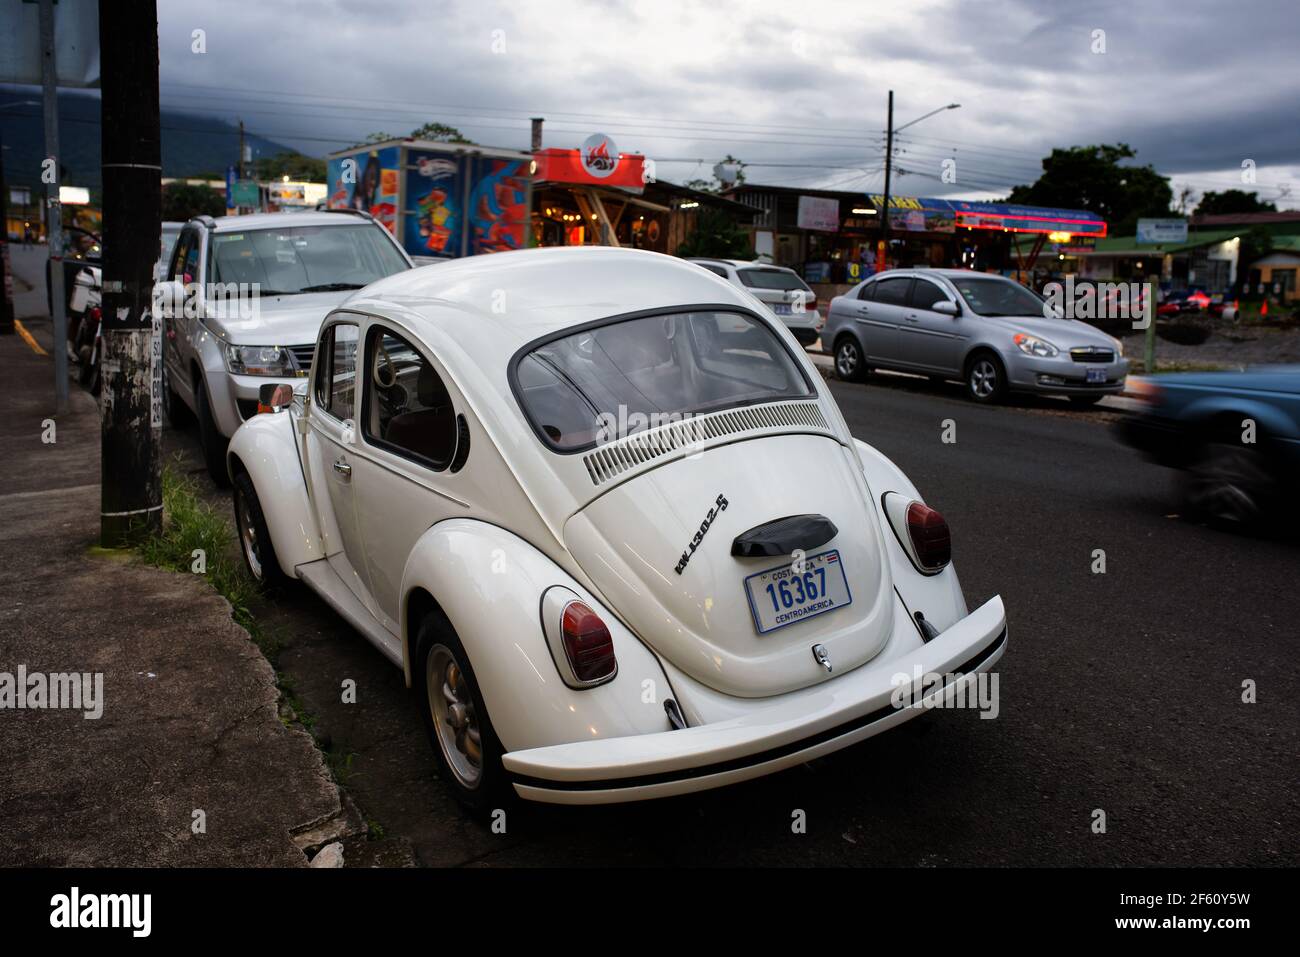 1970 Volkswagen 1302 S Beetle parked on a street in La Fortuna, Costa Rican town close to Arenal volcano. Stock Photo